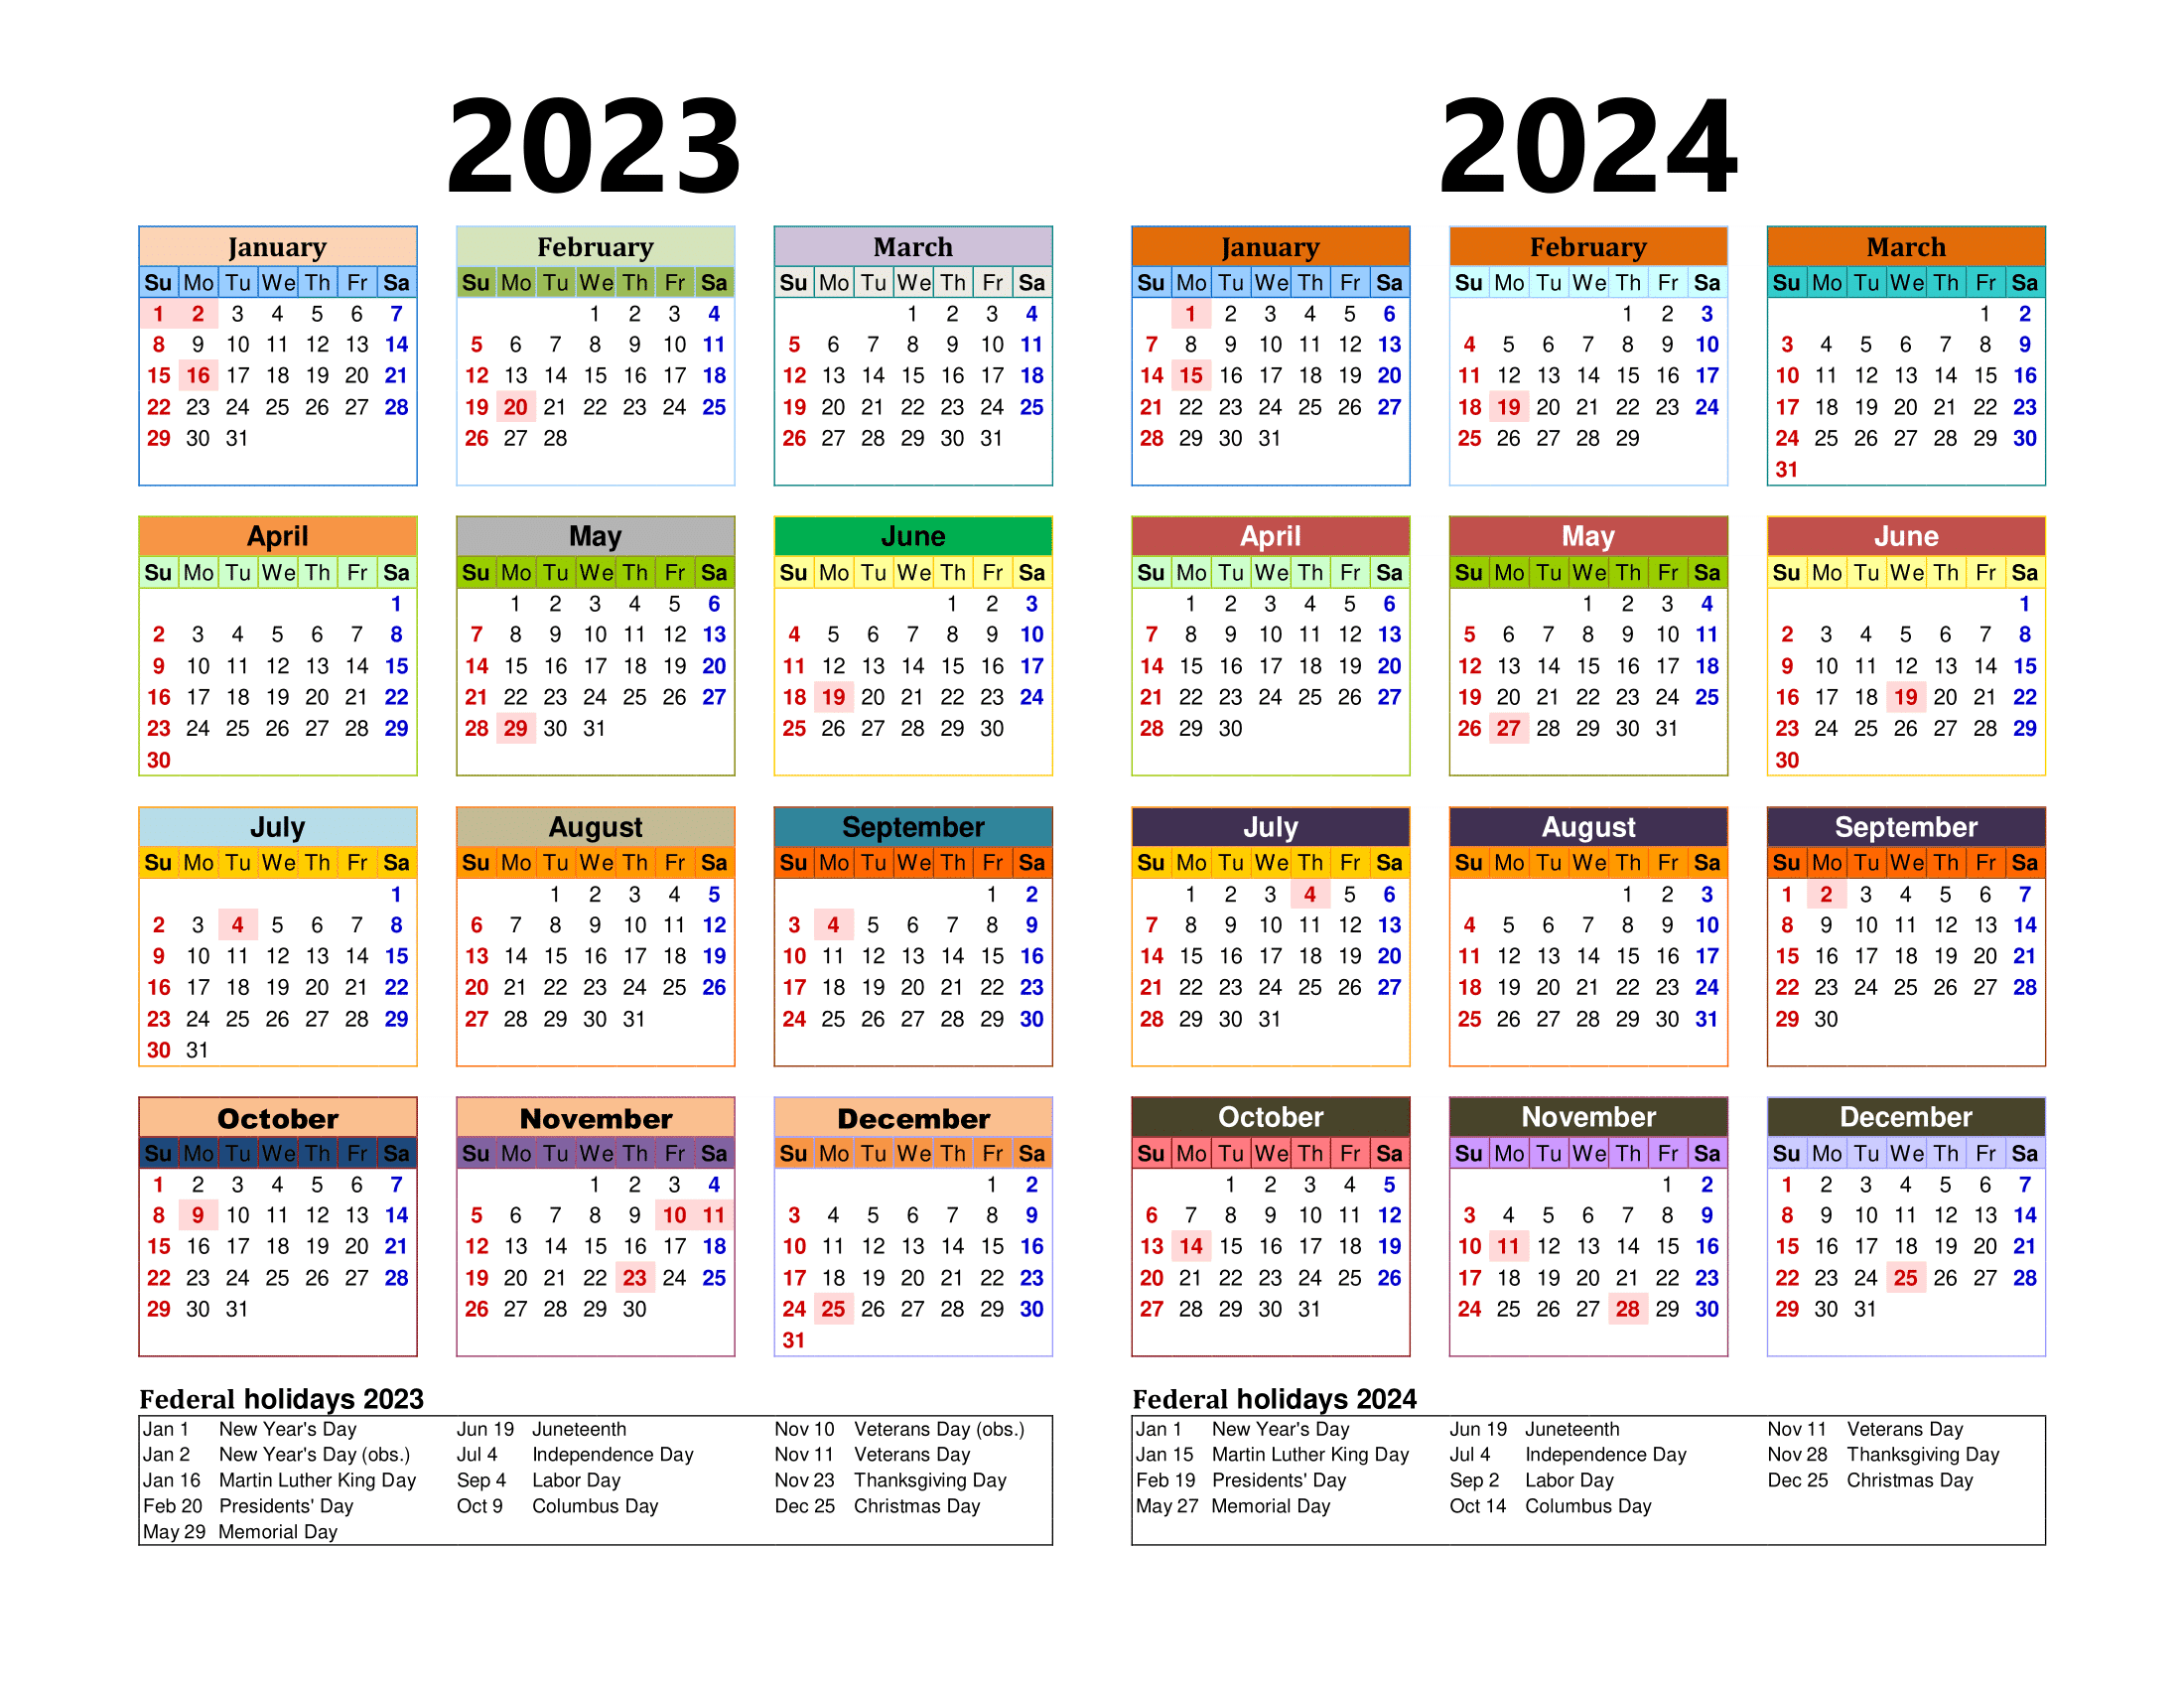 Free Printable Two Year Calendar Templates For 2023 And 2024 In Pdf for Printable Monthly Calendar 2023 And 2024